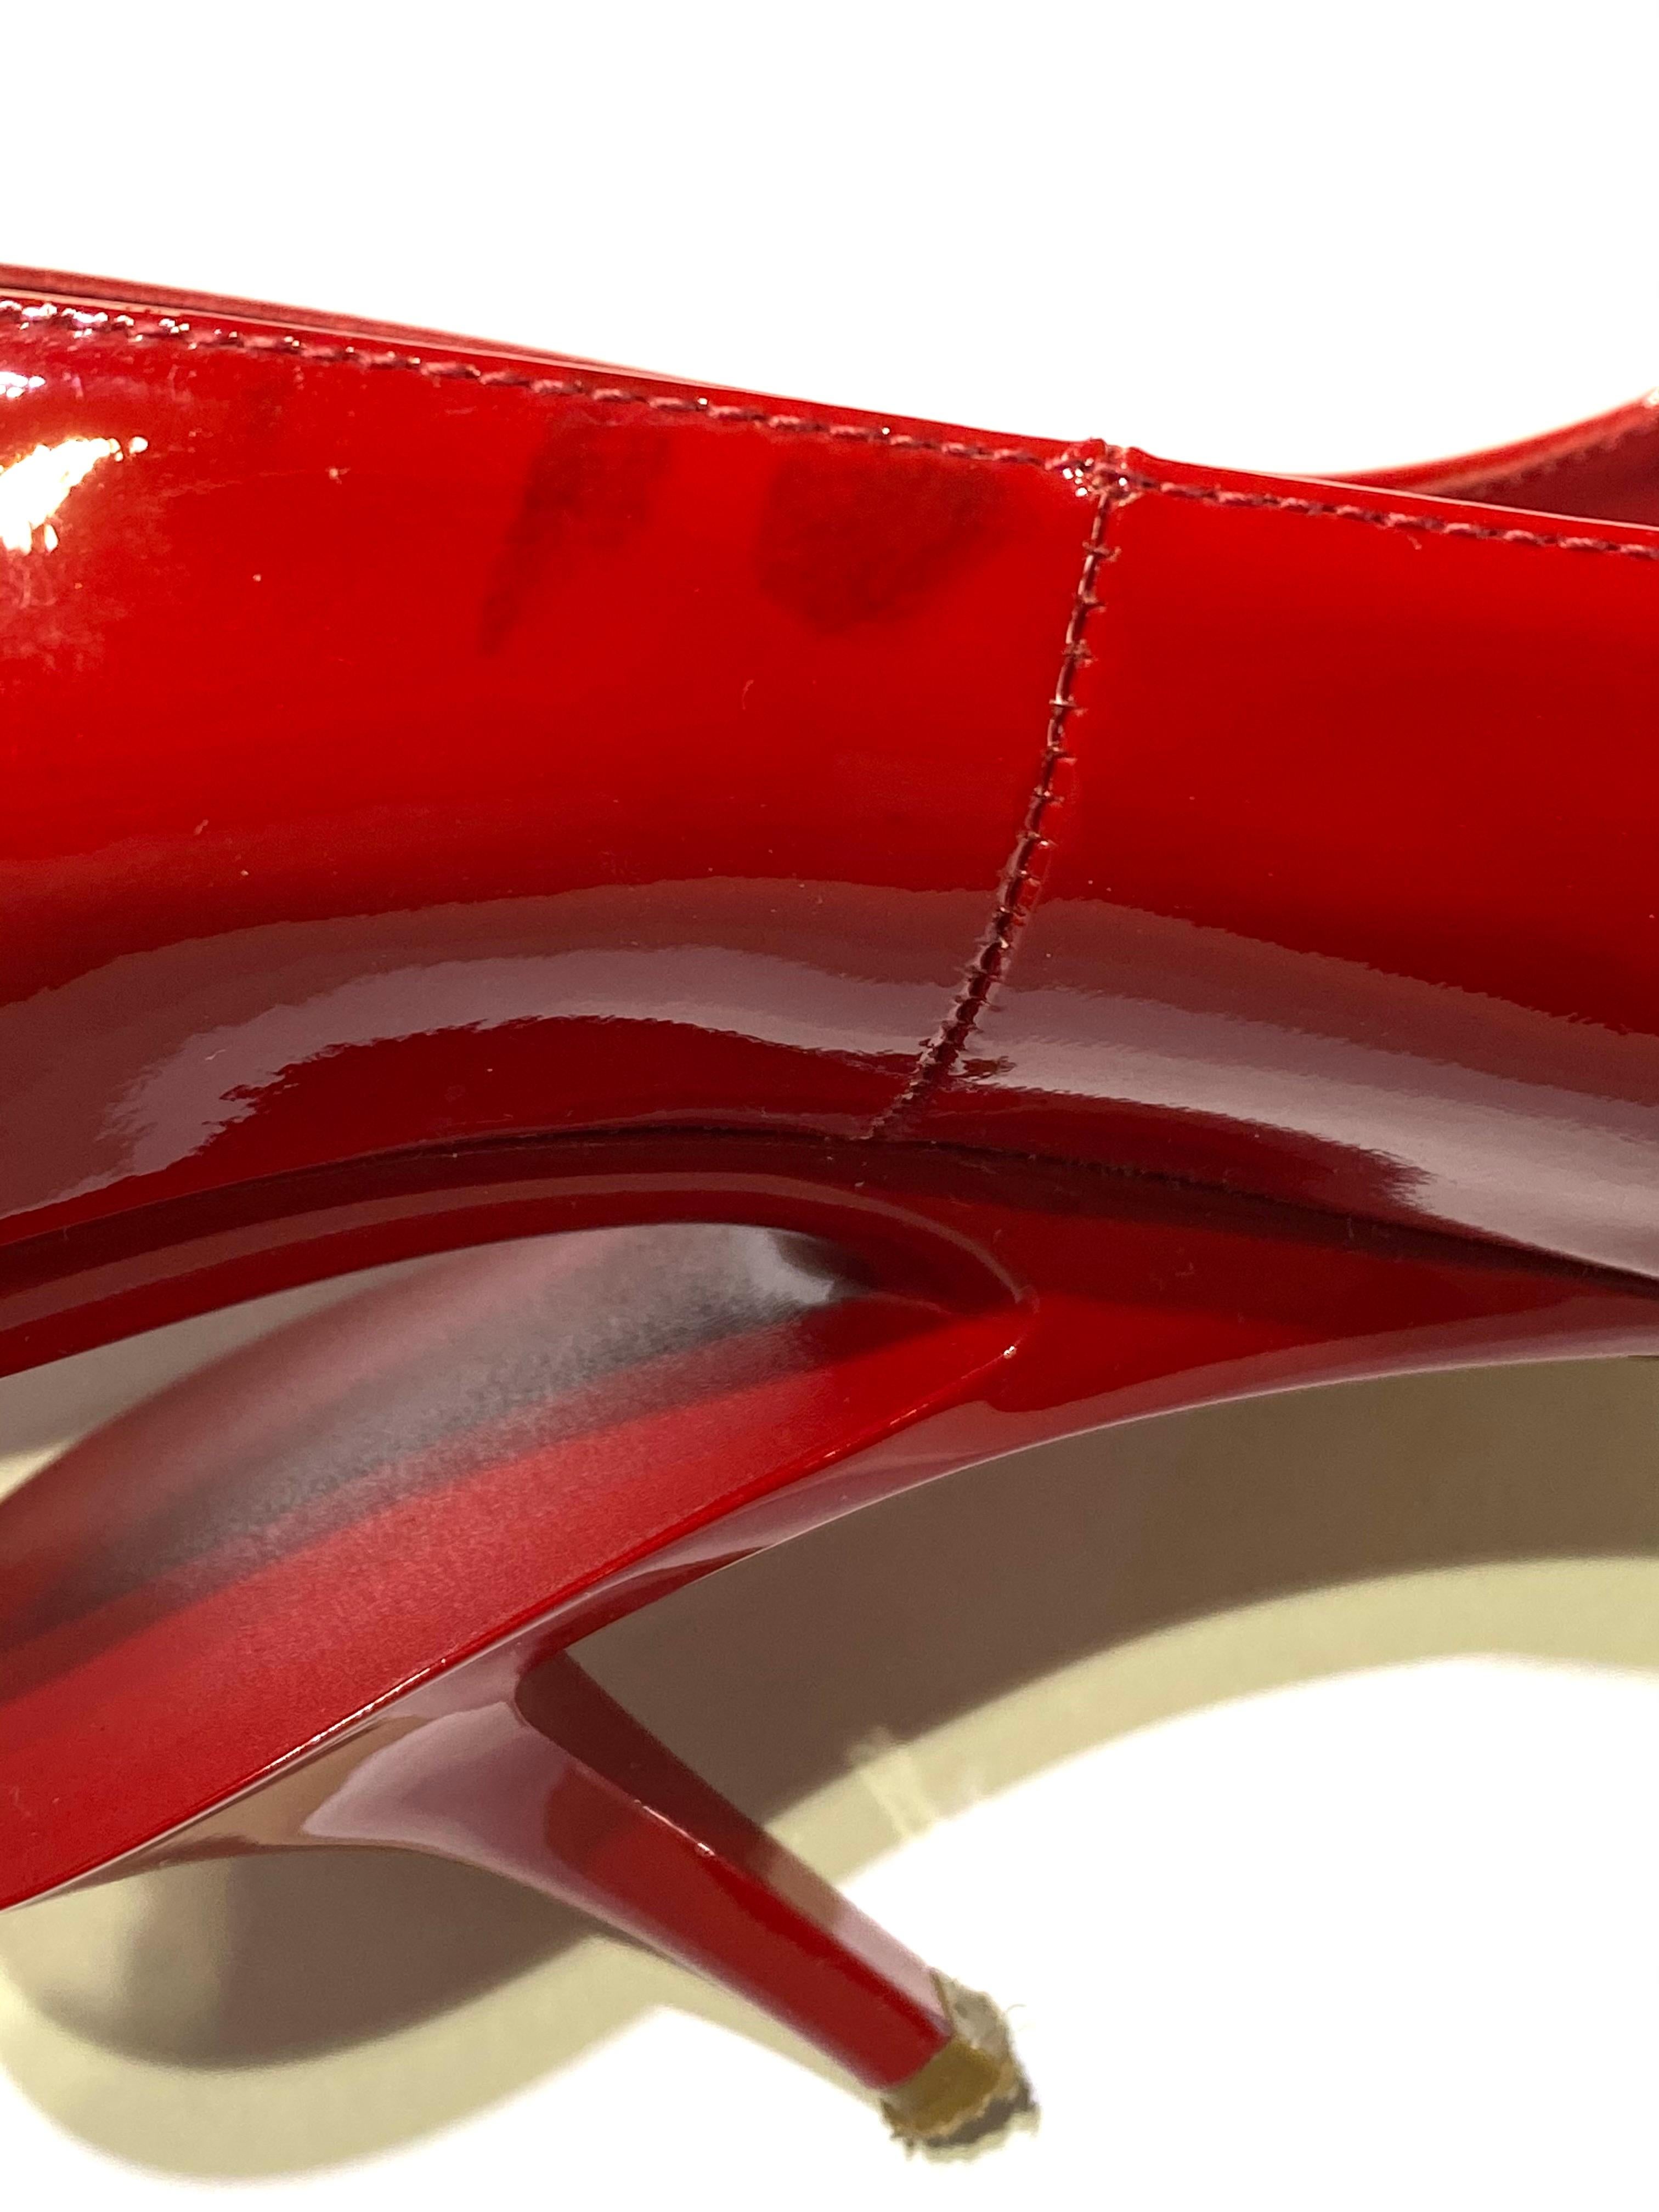 Maison Margiela Red Patent Leather Pump Heels Size 38 For Sale 6